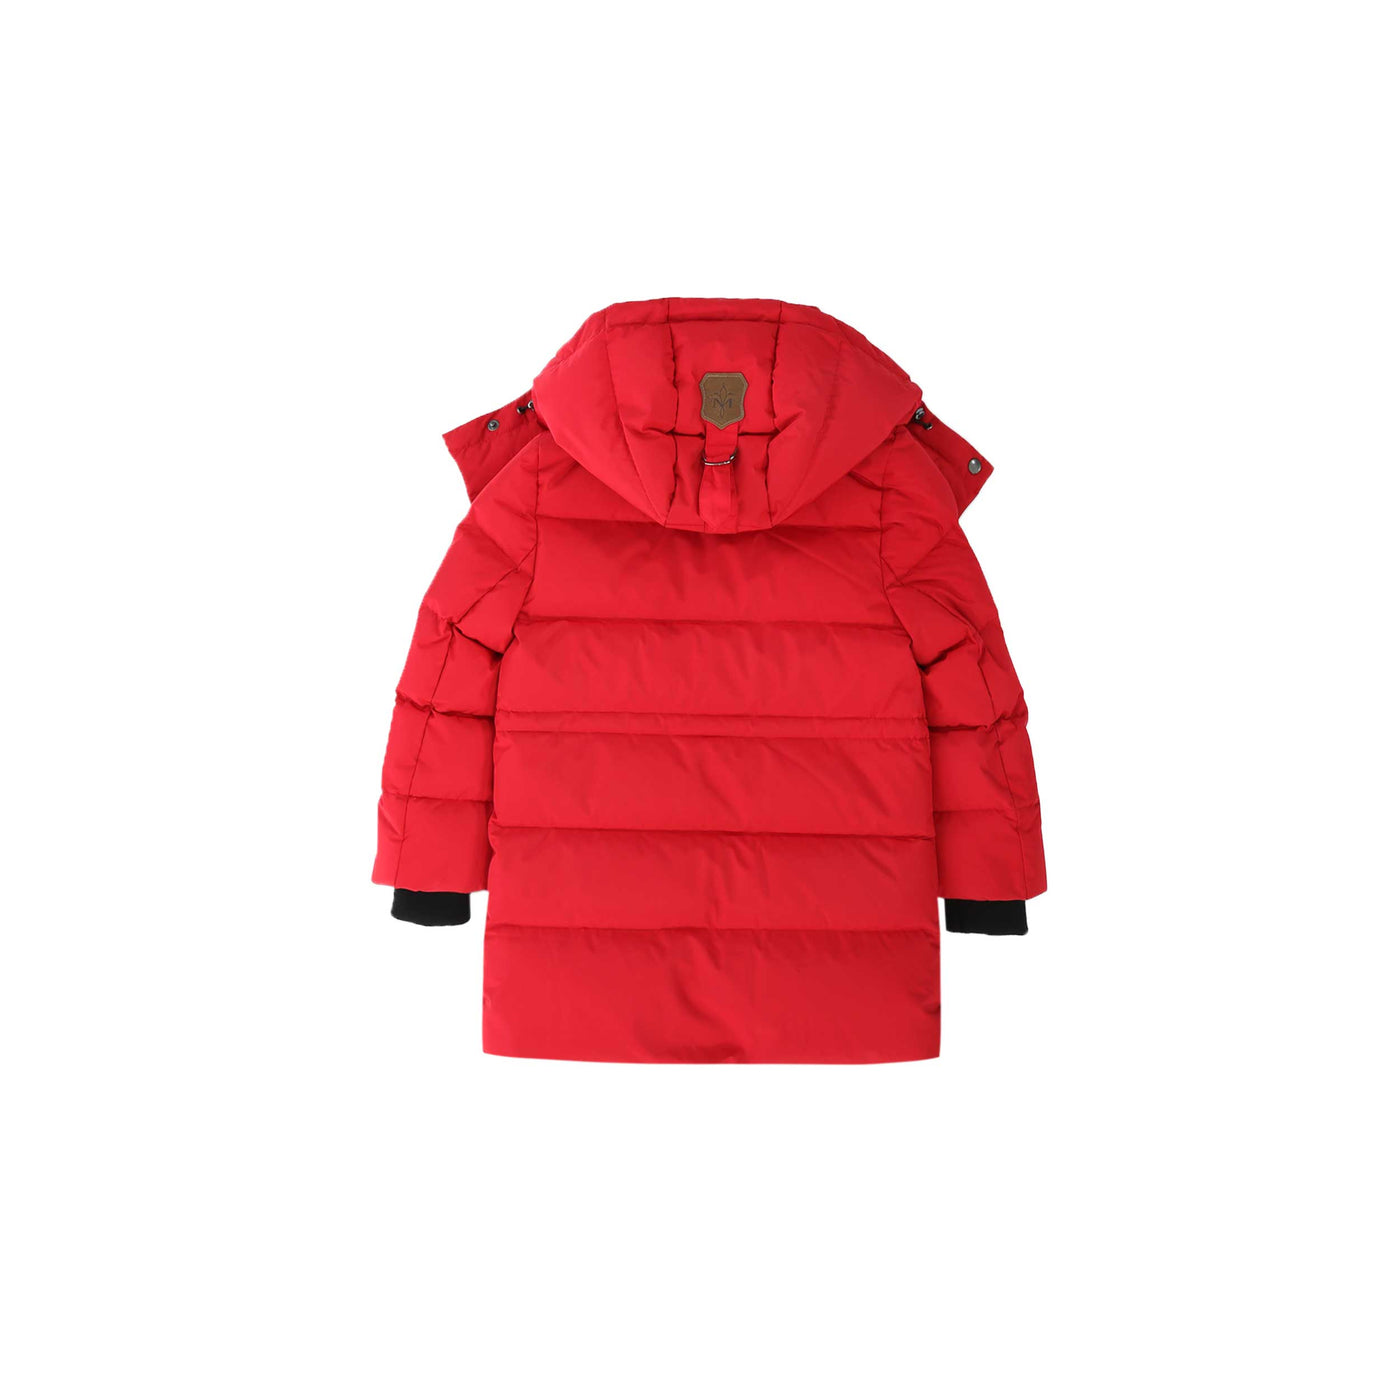 Mackage Marcy Kids Jacket in Red Back